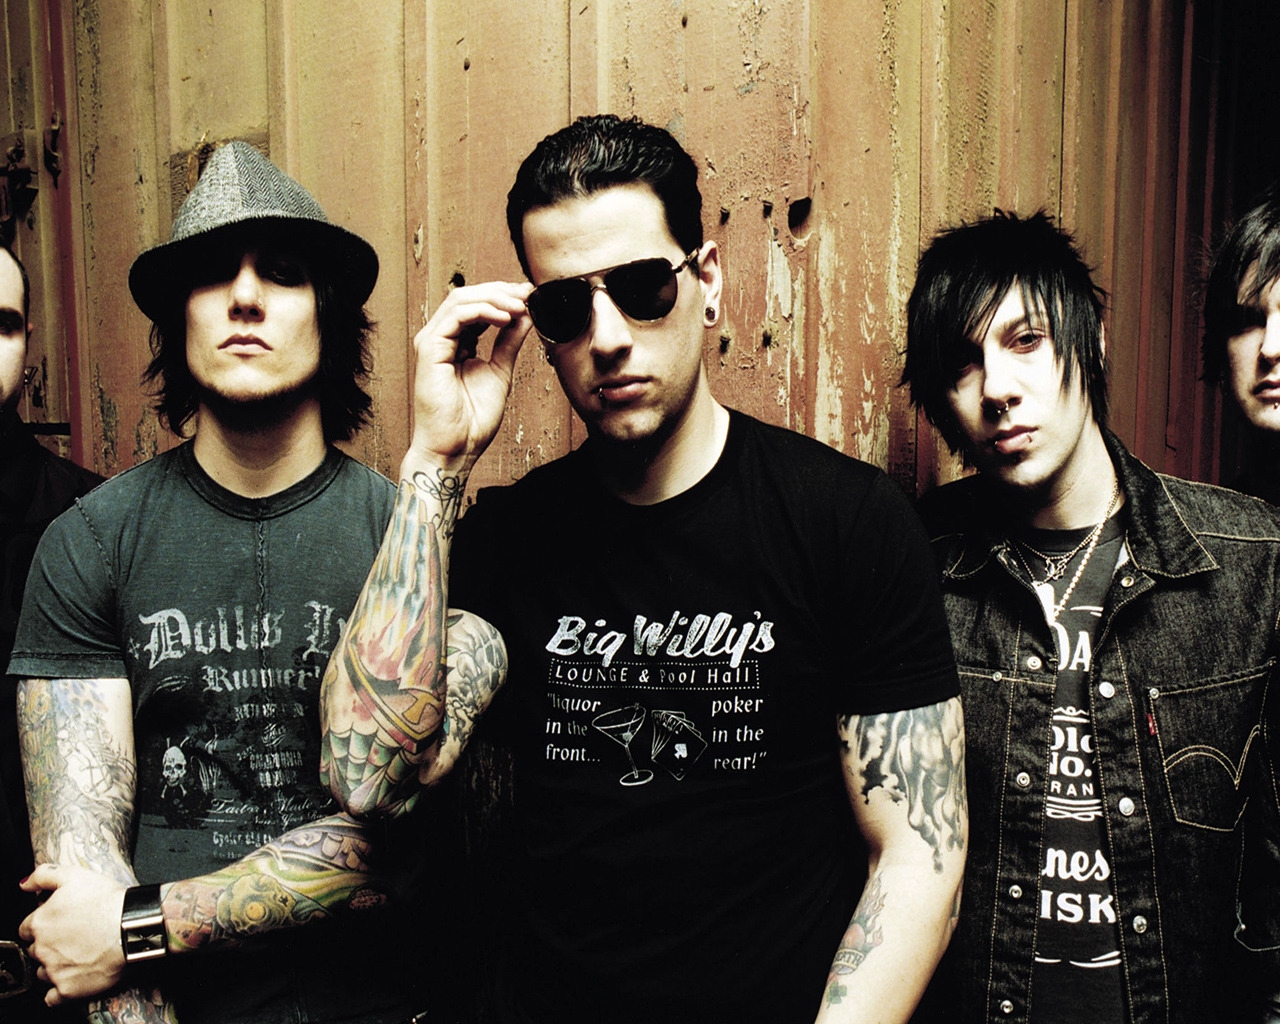 Avenged Sevenfold for 1280 x 1024 resolution